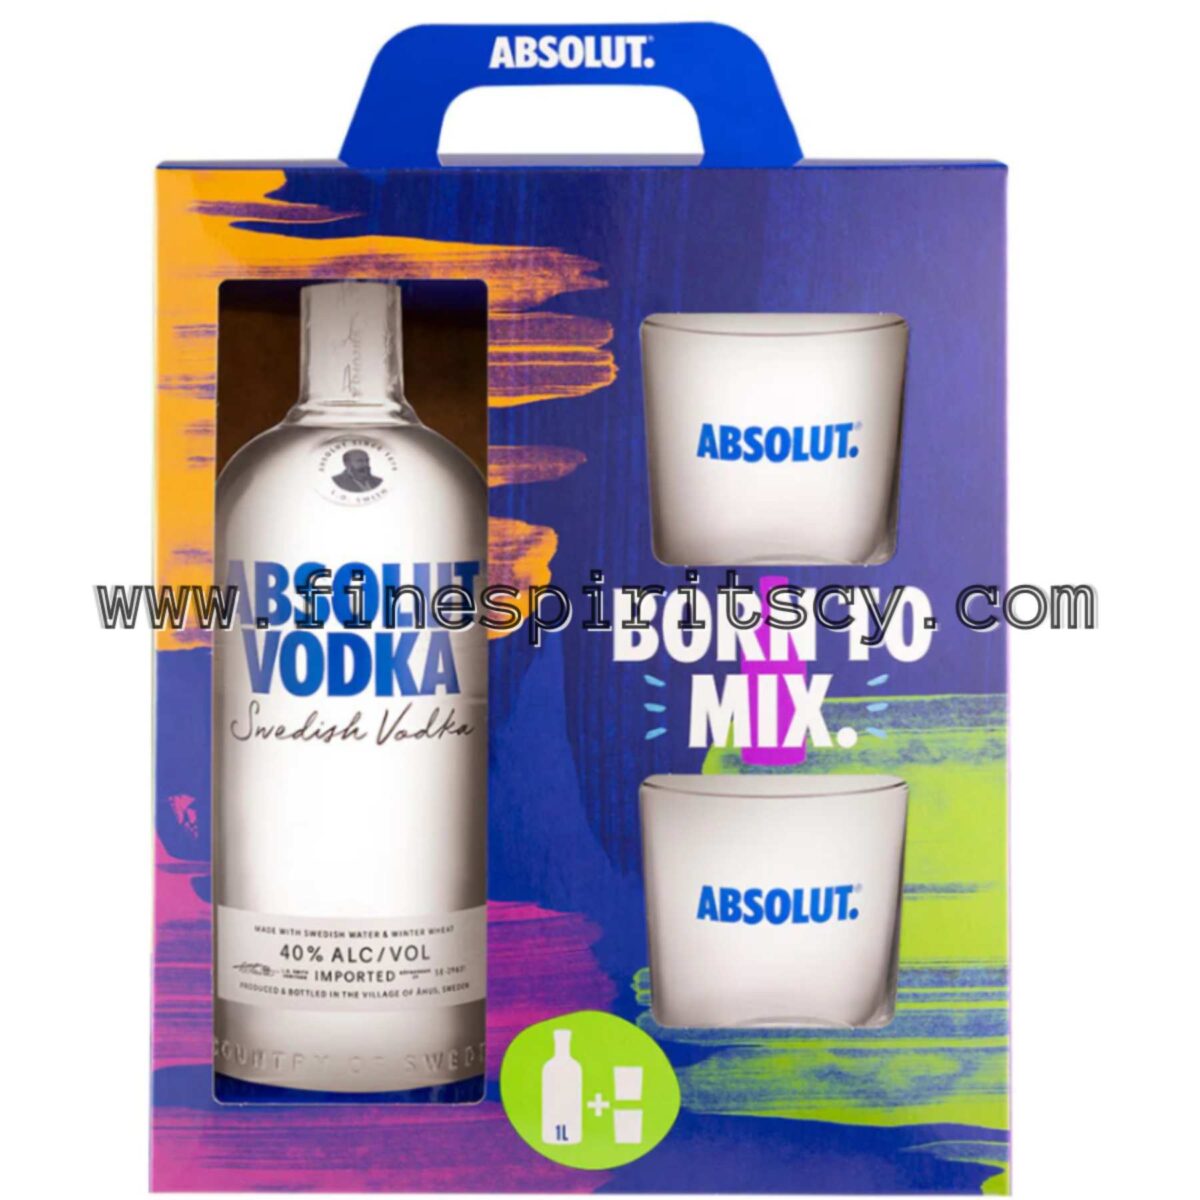 Absolut Vodka Gift Set With 2 Two Glasses price cyprus fine spirits cy